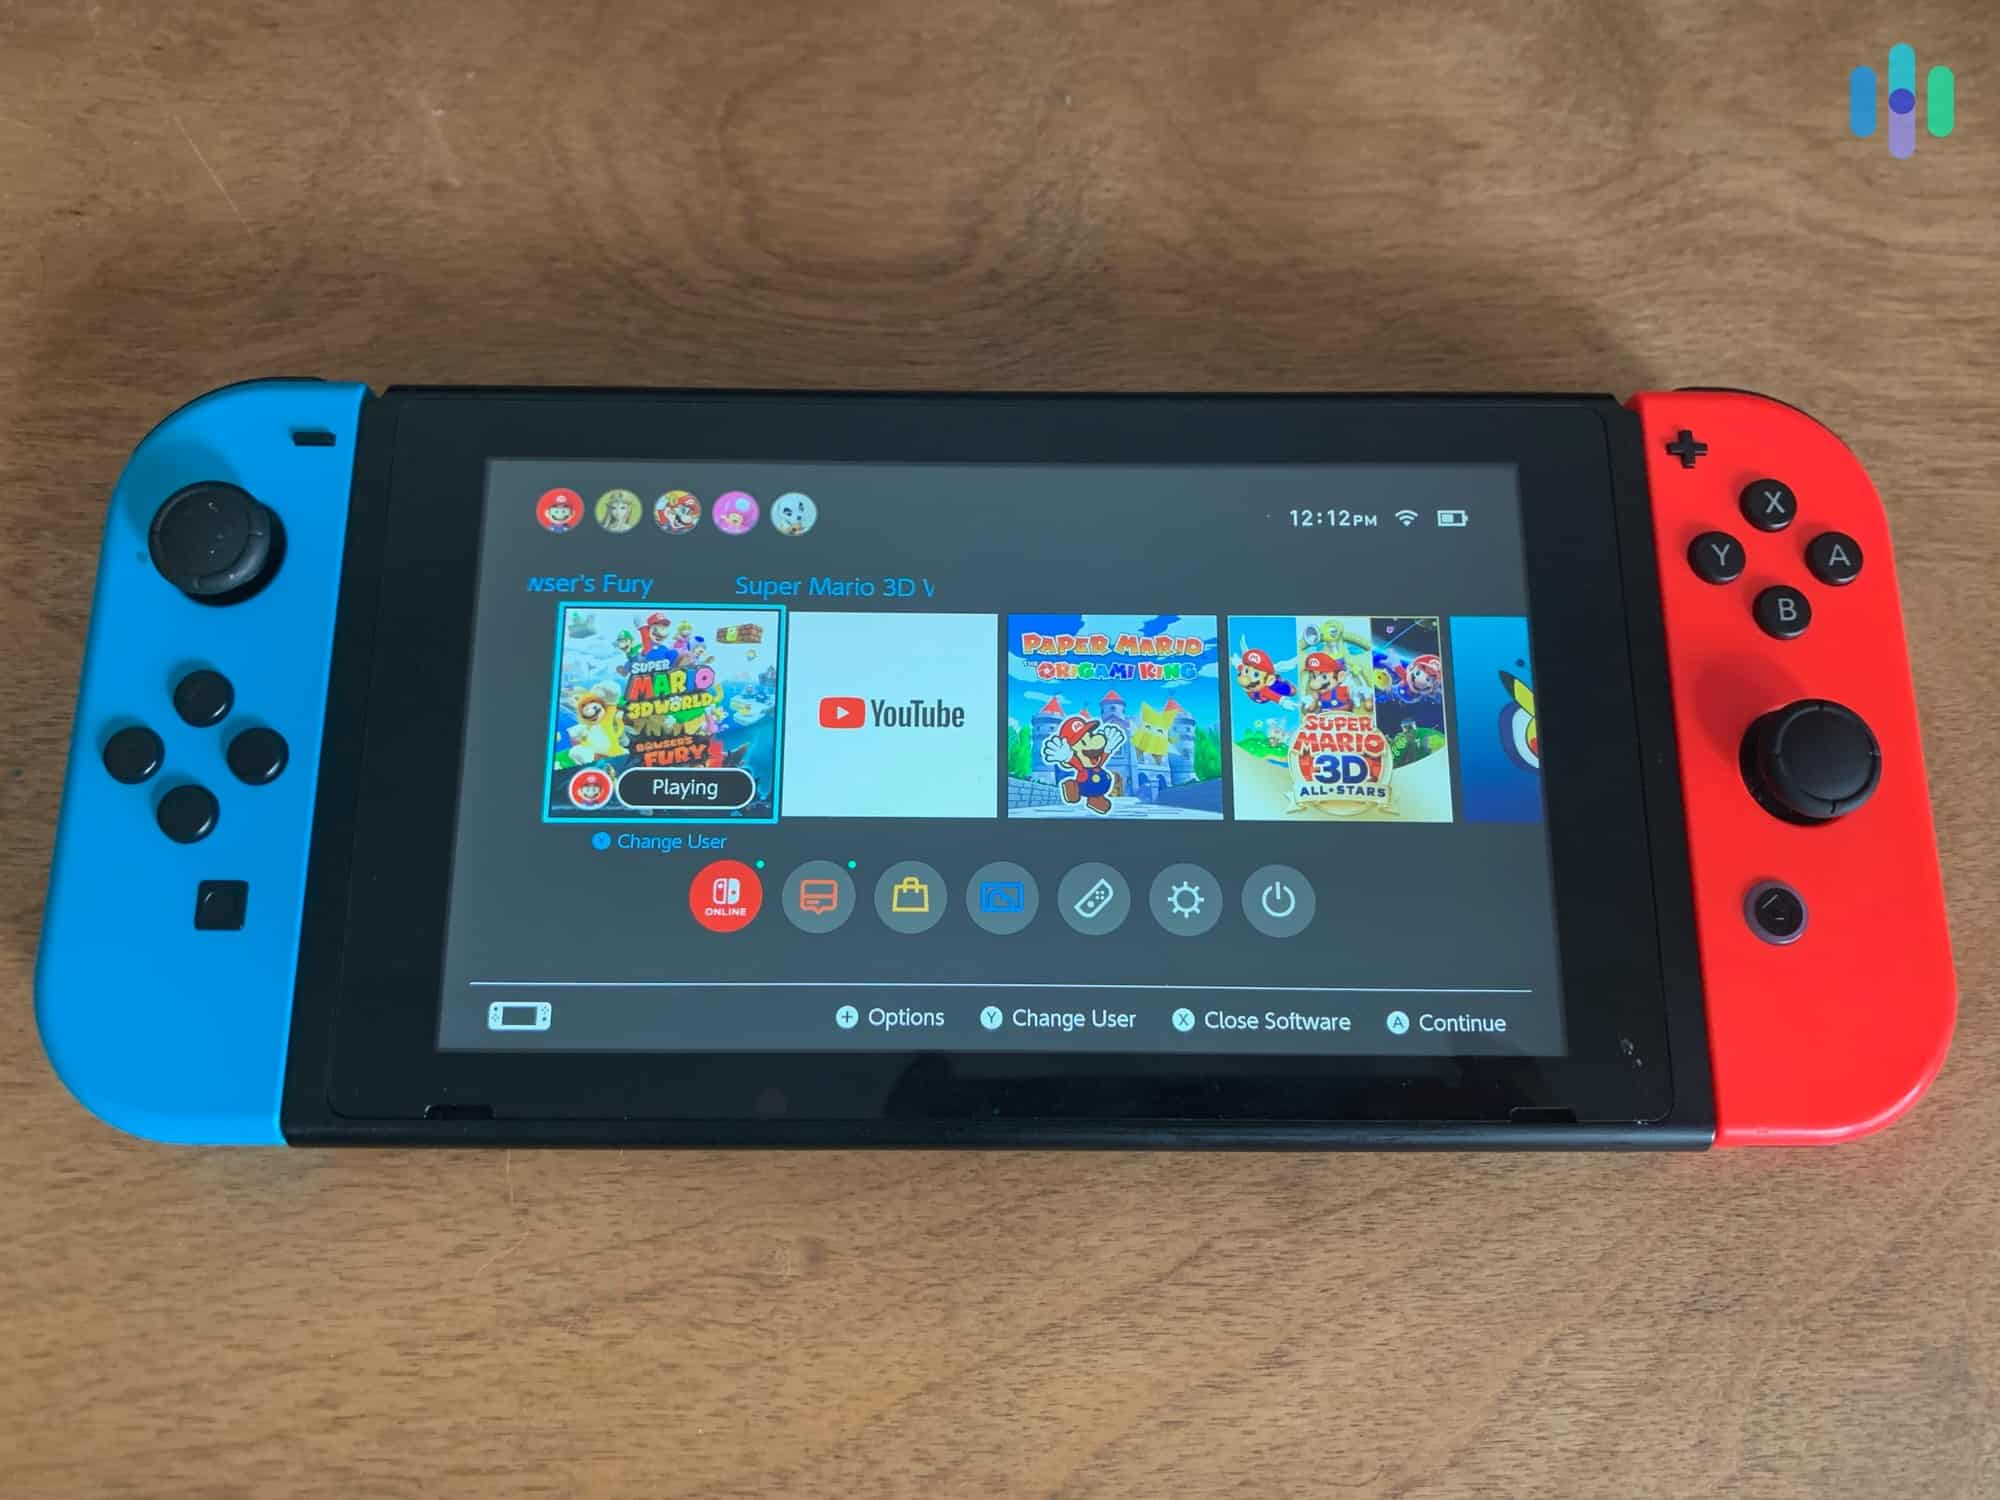 The Best Free Games Every Nintendo Switch Owner Should Have Installed